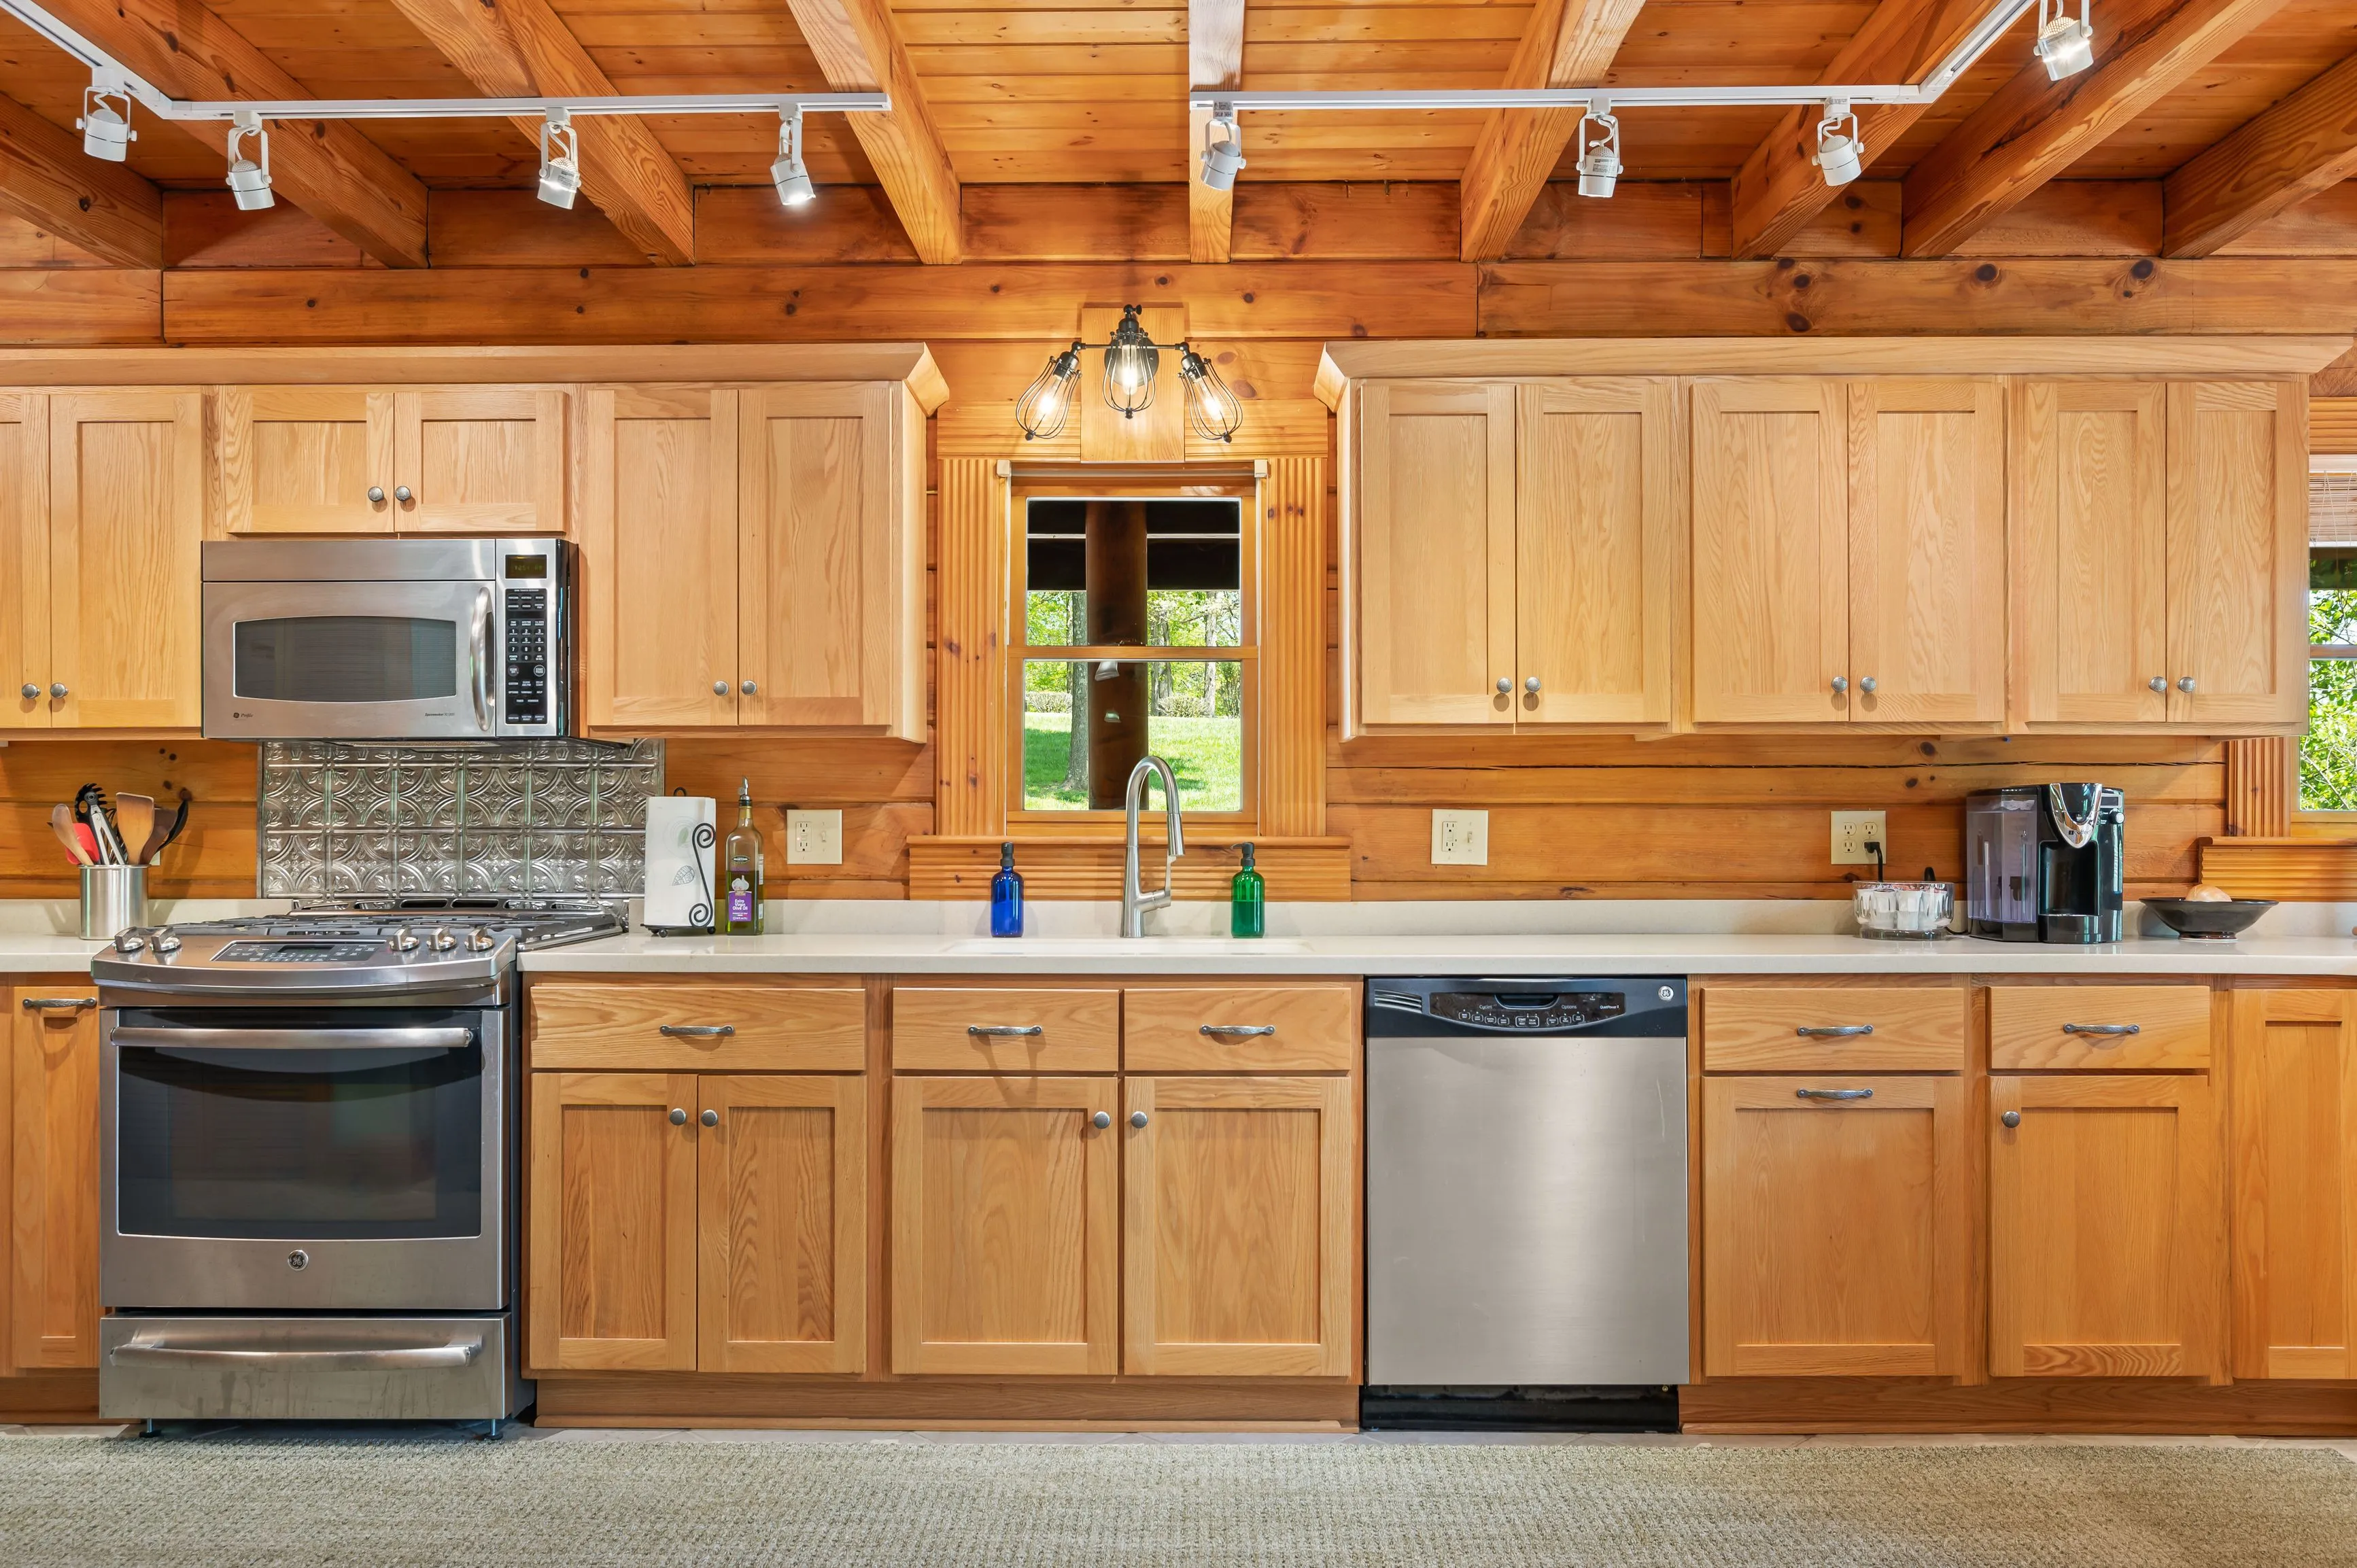 Rustic kitchen interior with wooden cabinets and appliances, including a stainless steel dishwasher and black stove.